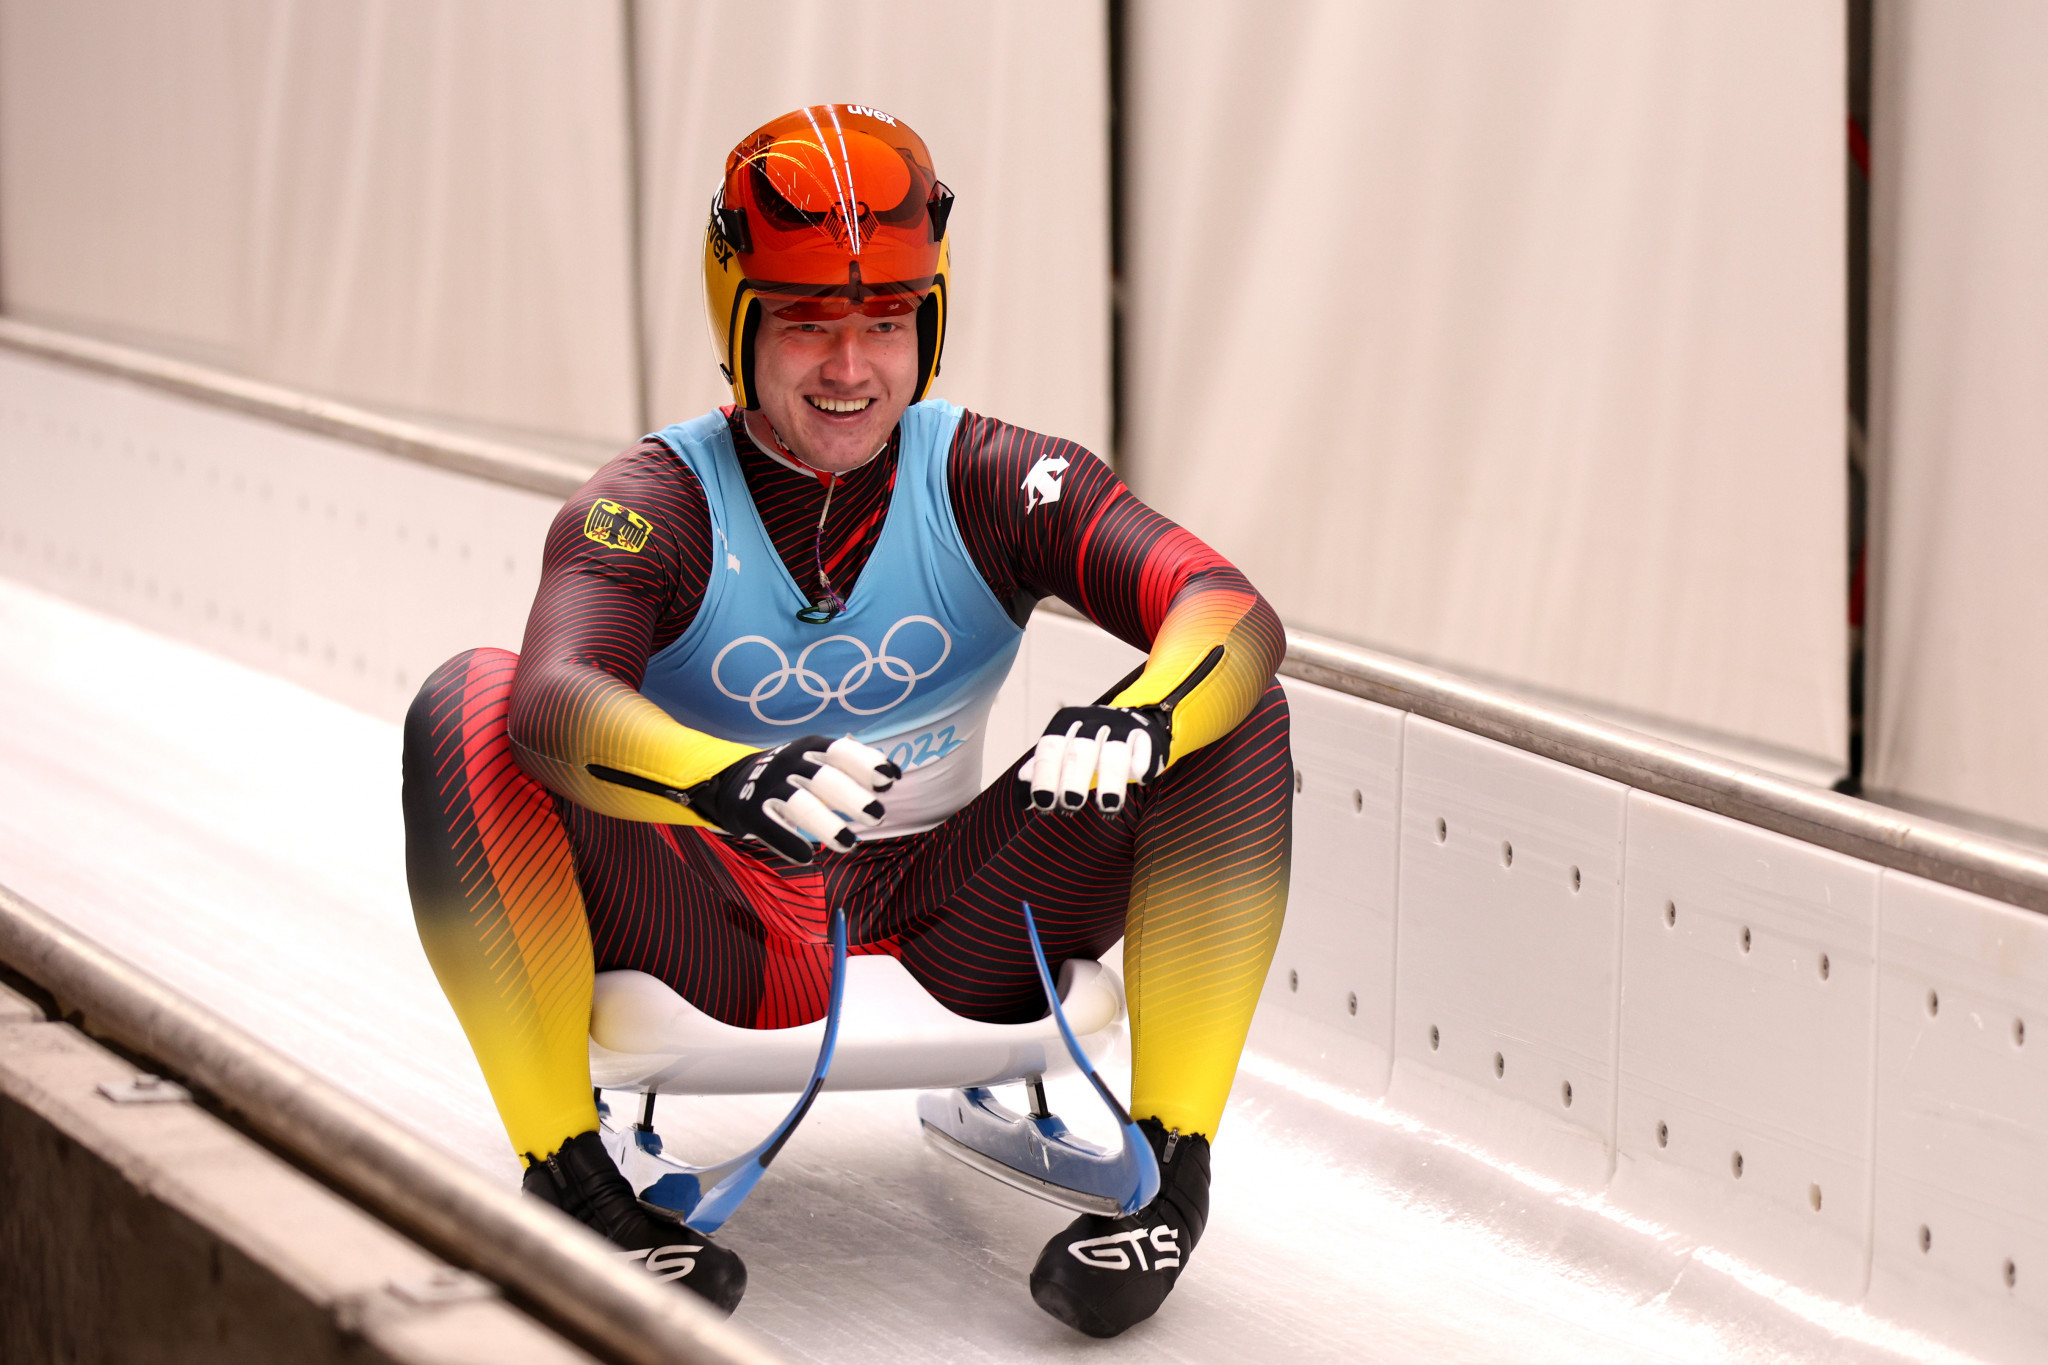 Max Langenhan won a fifth successive men's singles title at the season's final Luge World Cup in Winterberg ©Getty Images